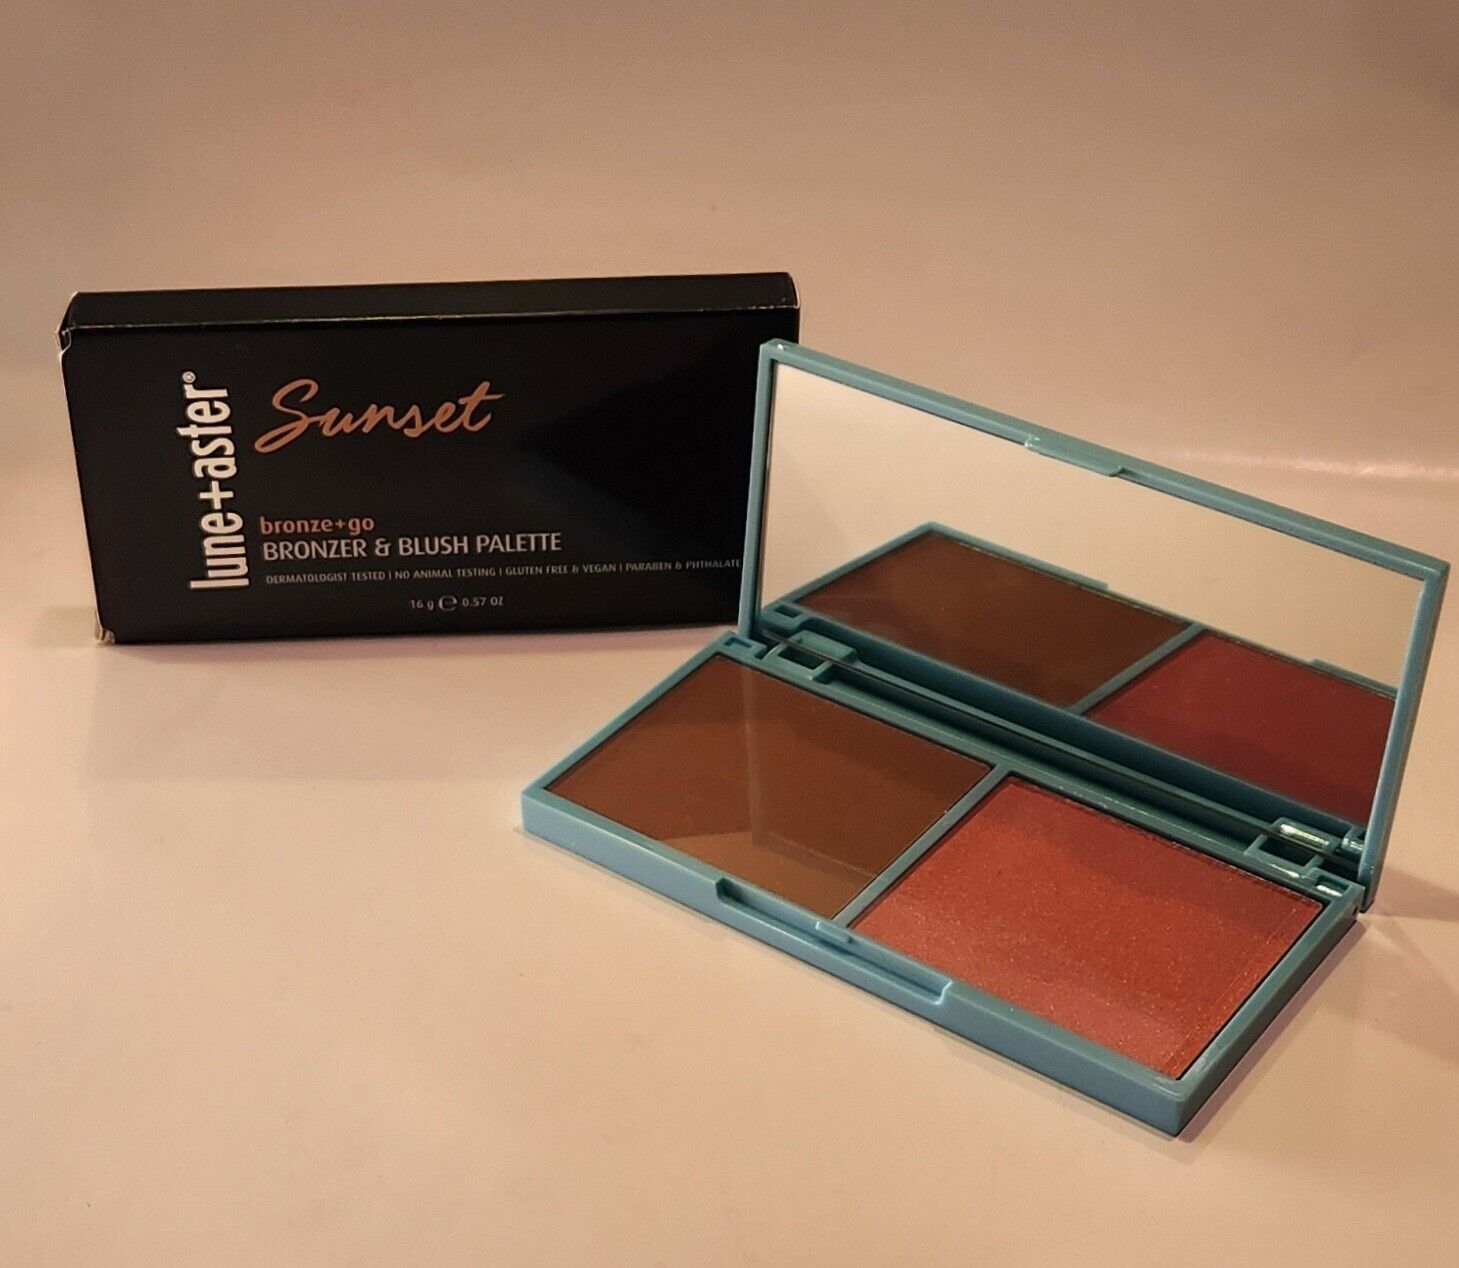 Primary image for Lune + Aster Sunset Bronzer & Blush Palette